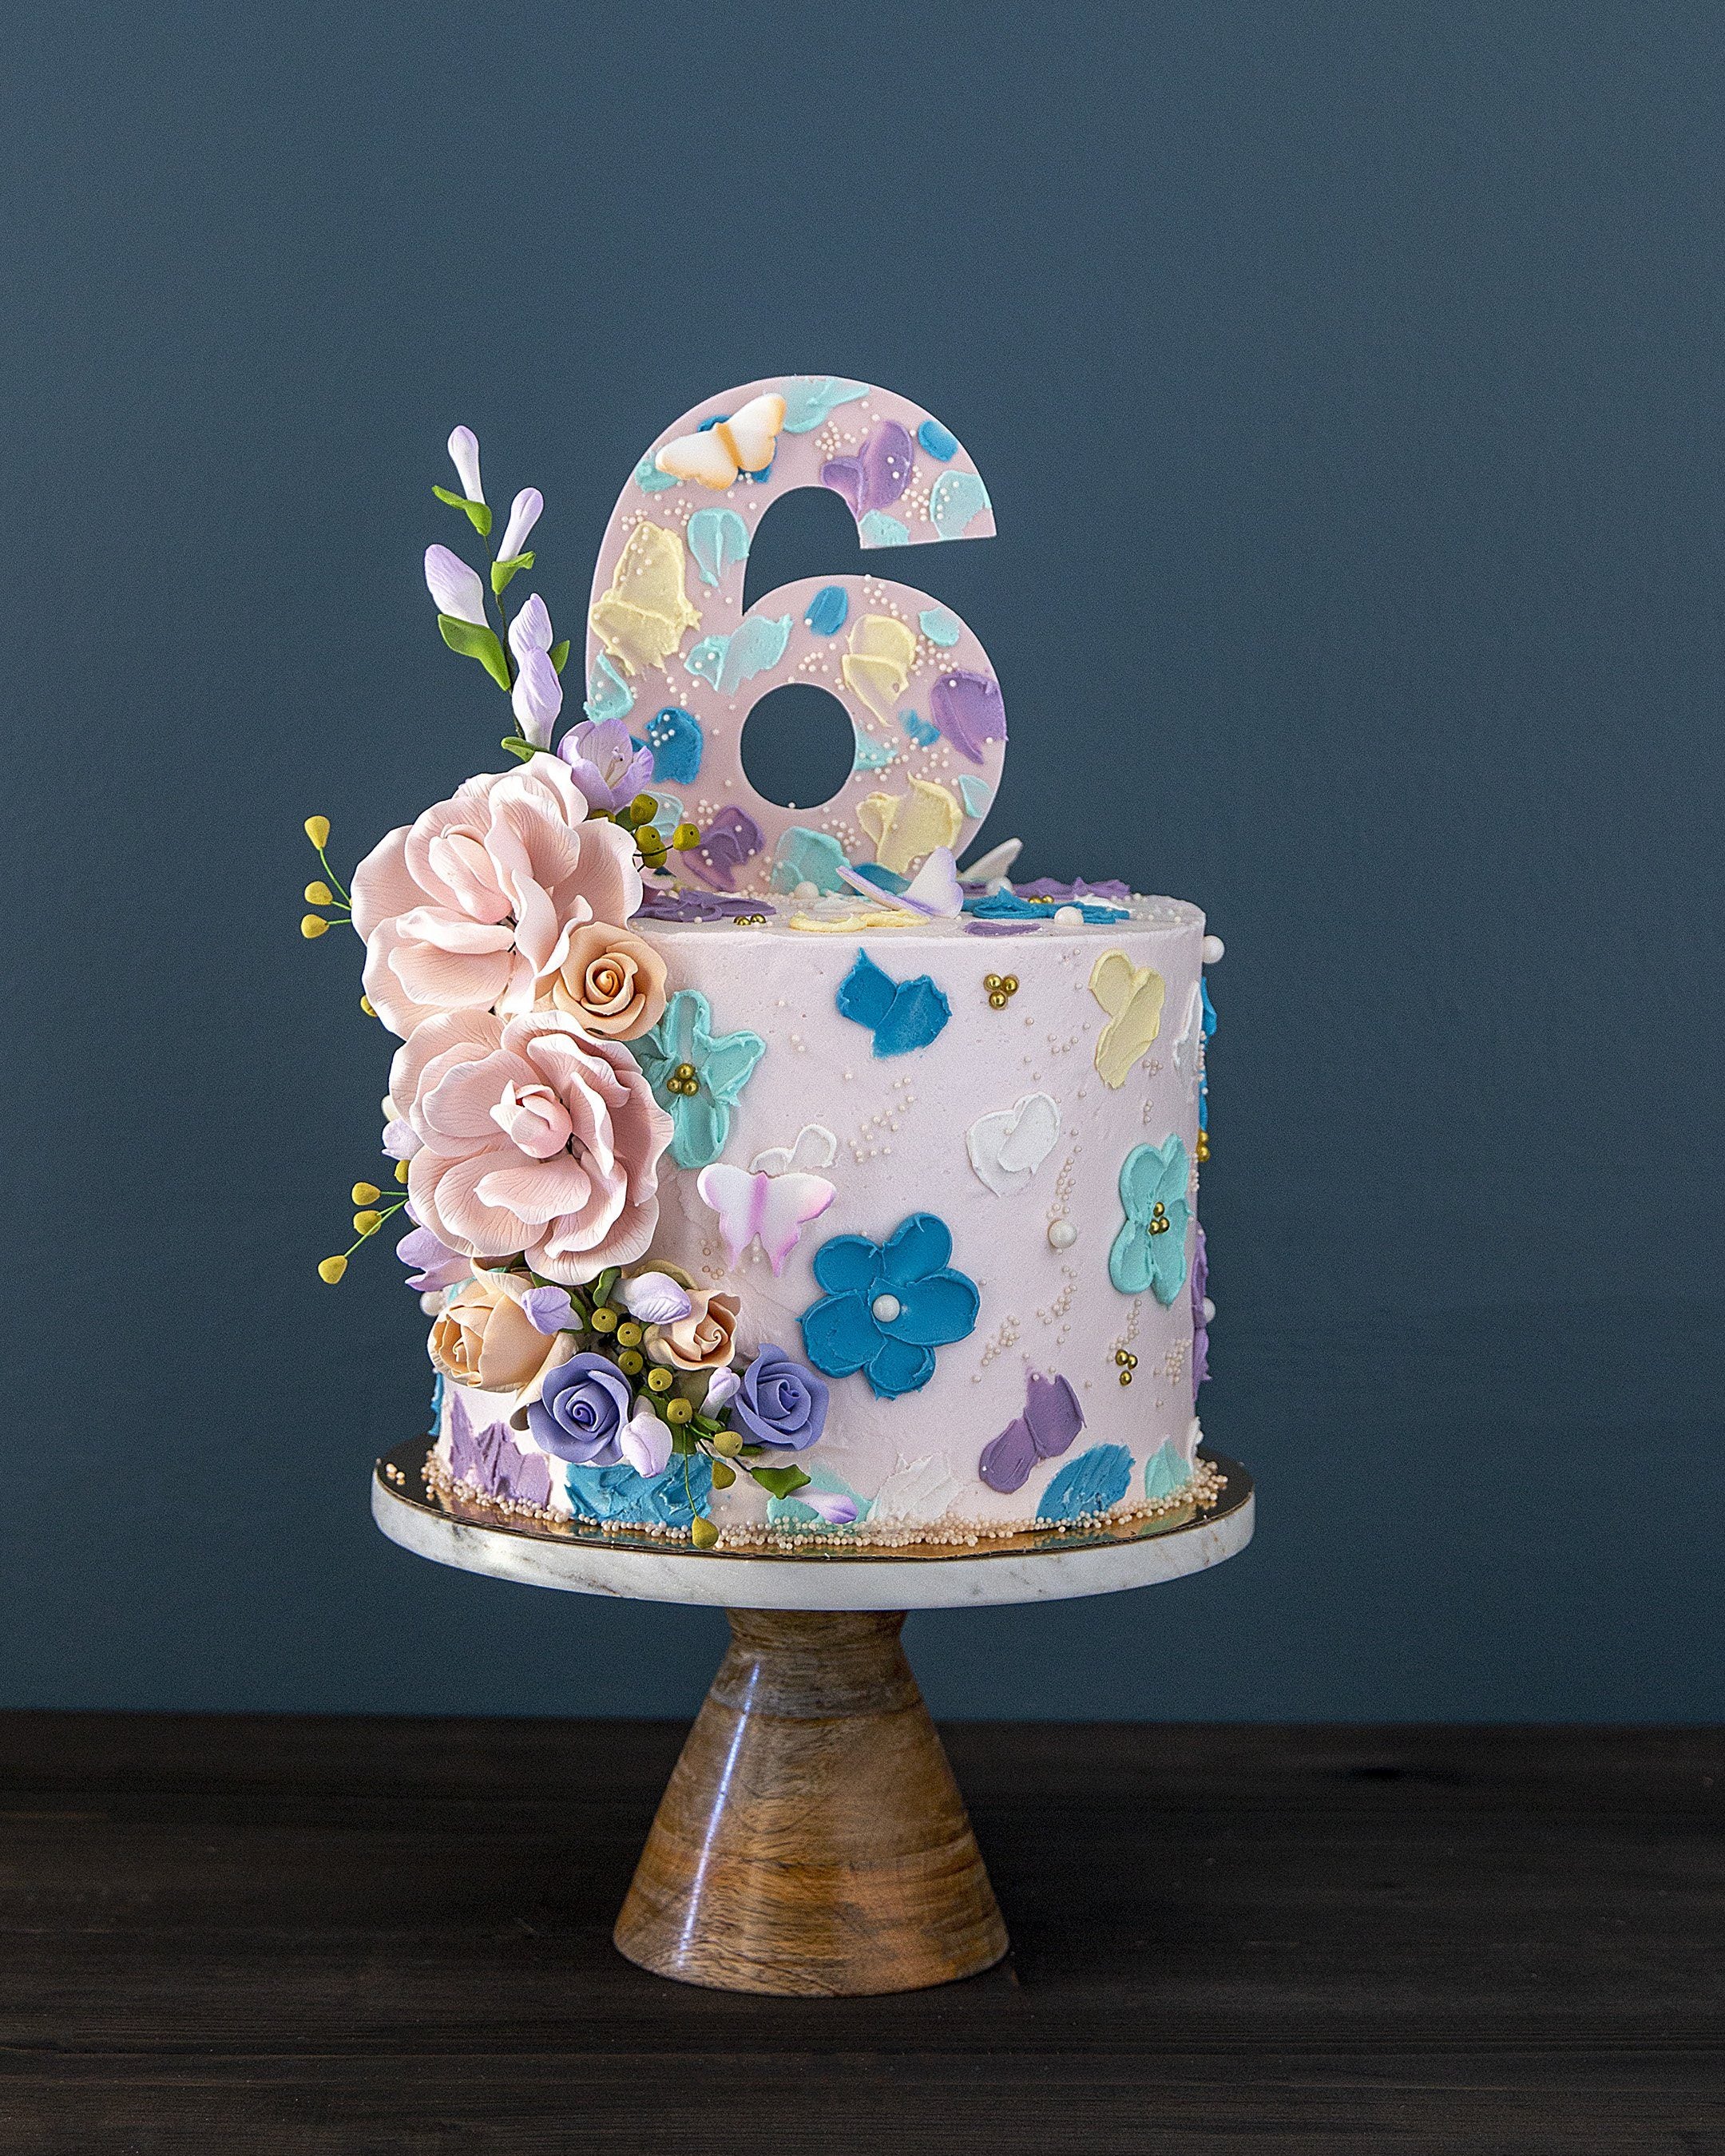 Floral 1st birthday cakes | Wedding & Party Ideas | 100 Layer Cake